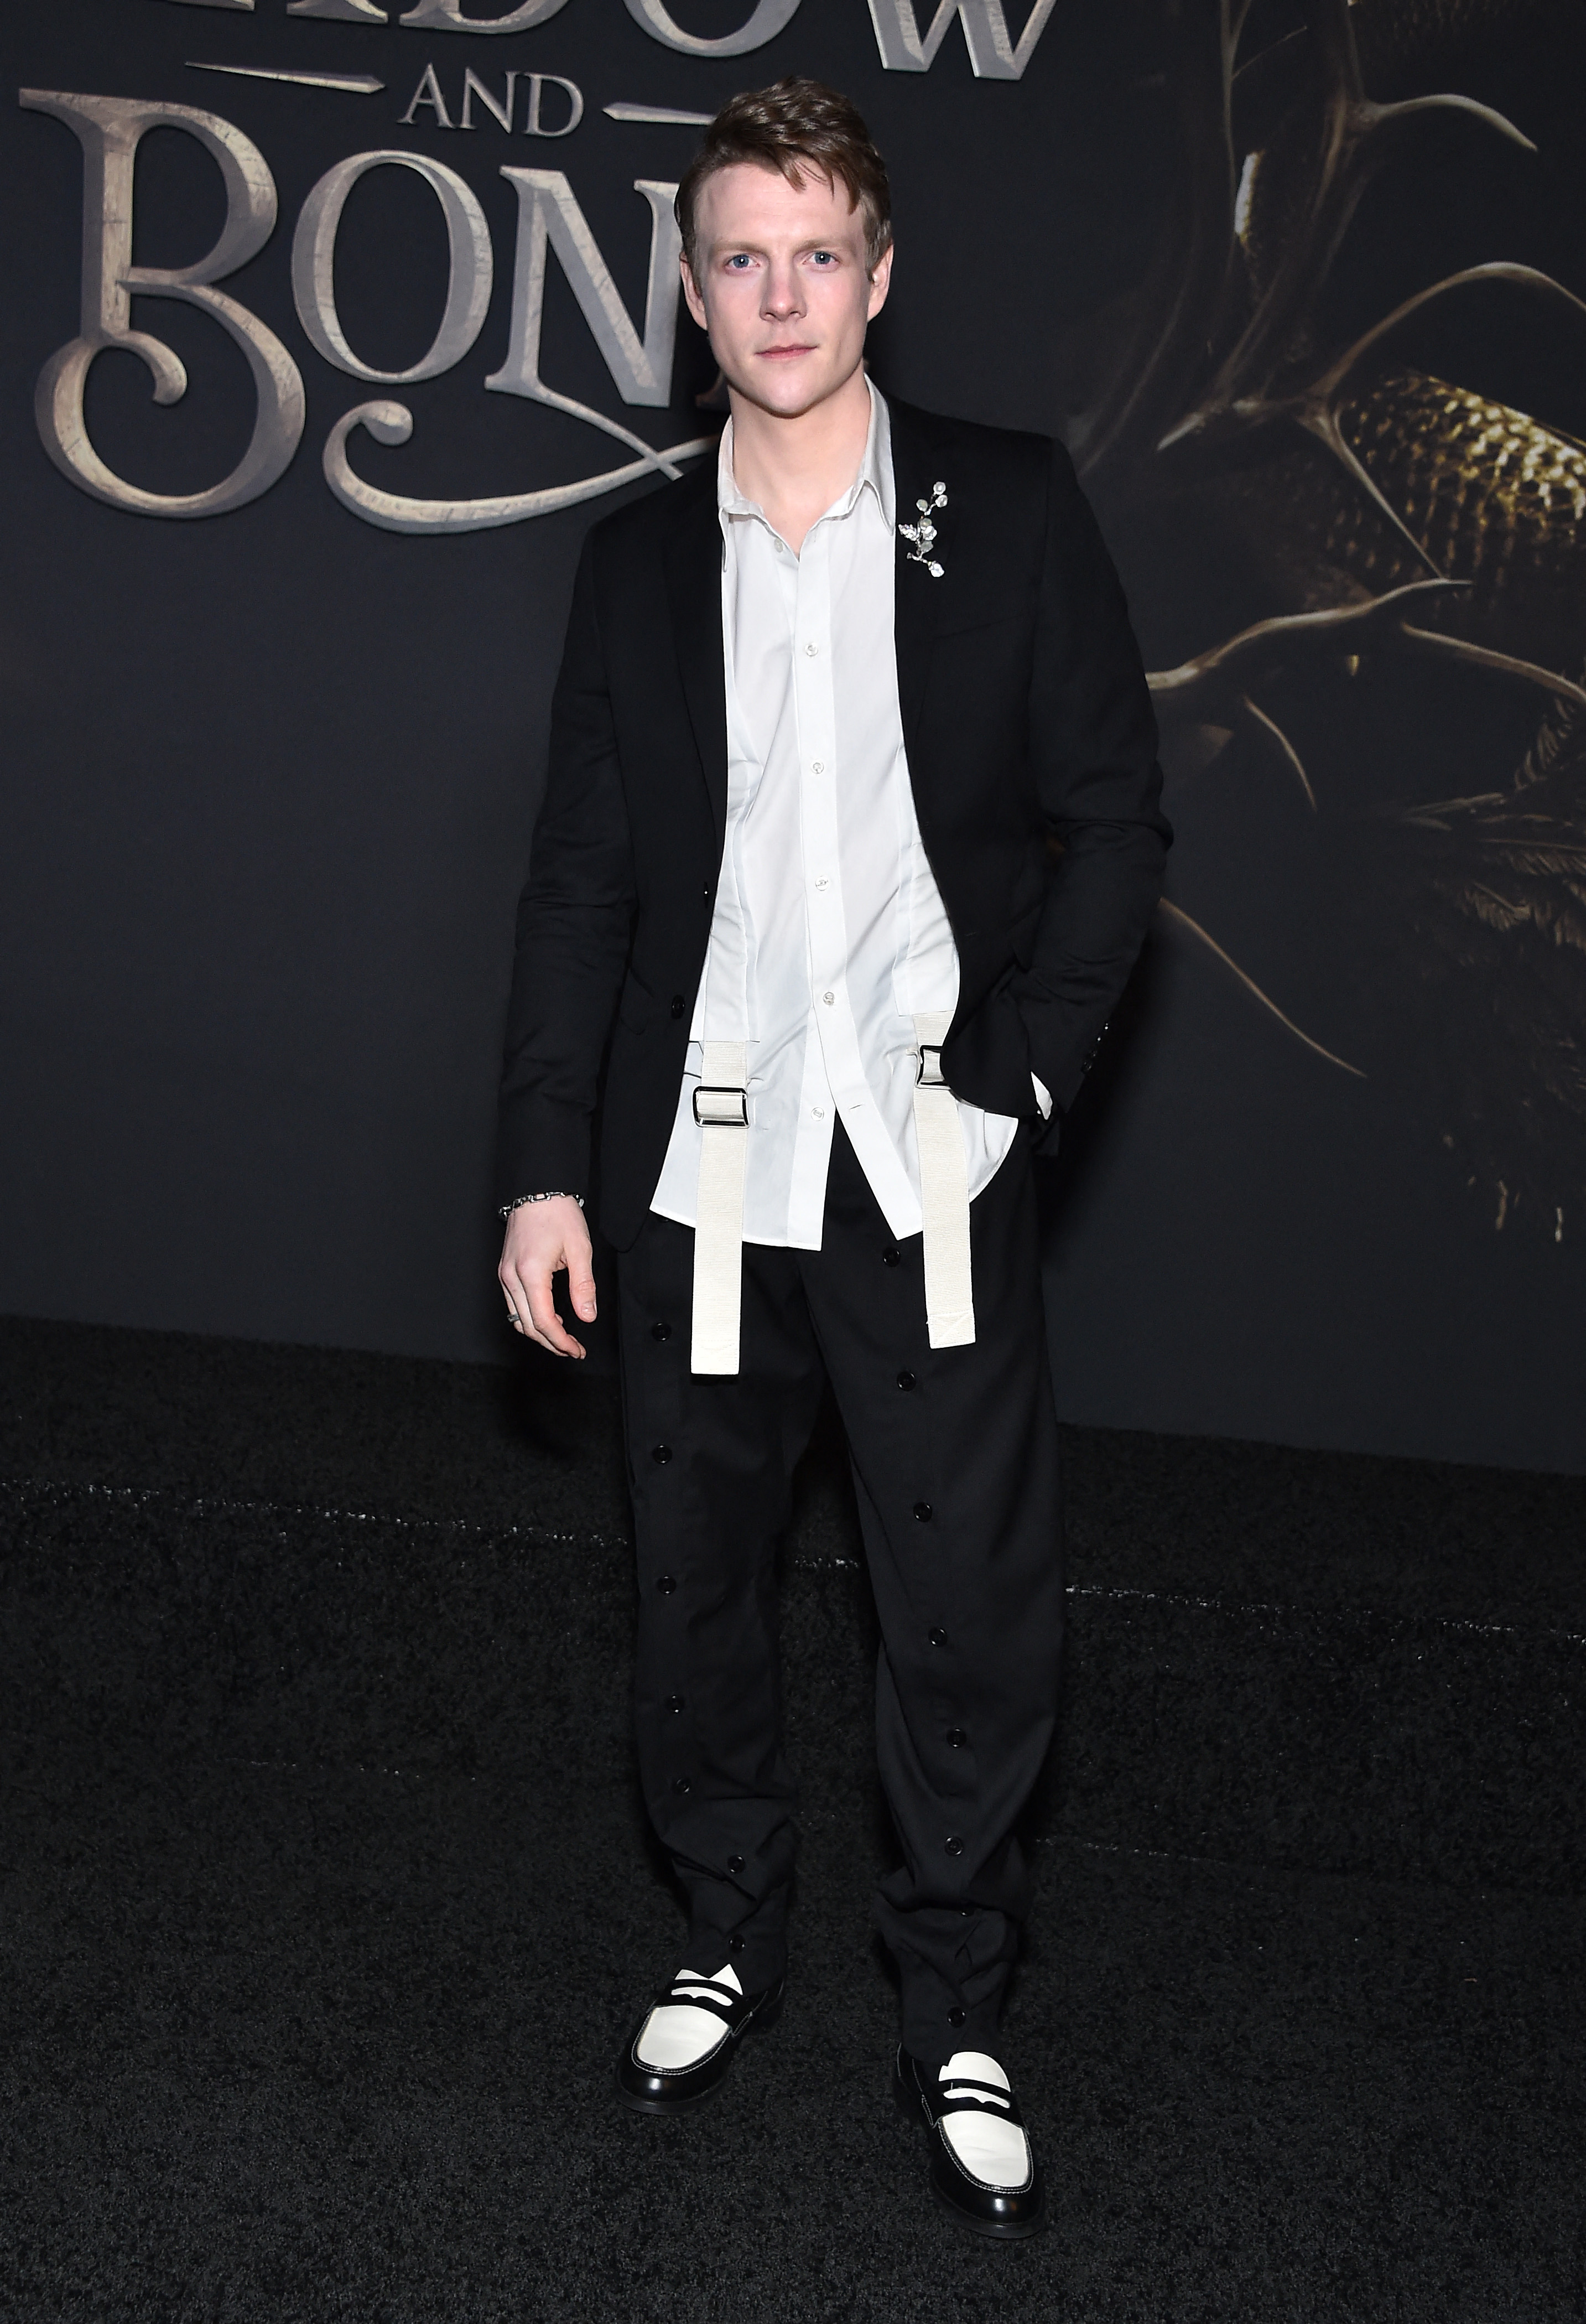 Patrick Gibson arrives for "Shadow And Bone" Season 2 premiere at the Tudum Theatre on March 9, 2023, in Los Angeles, California | Source: Getty Images